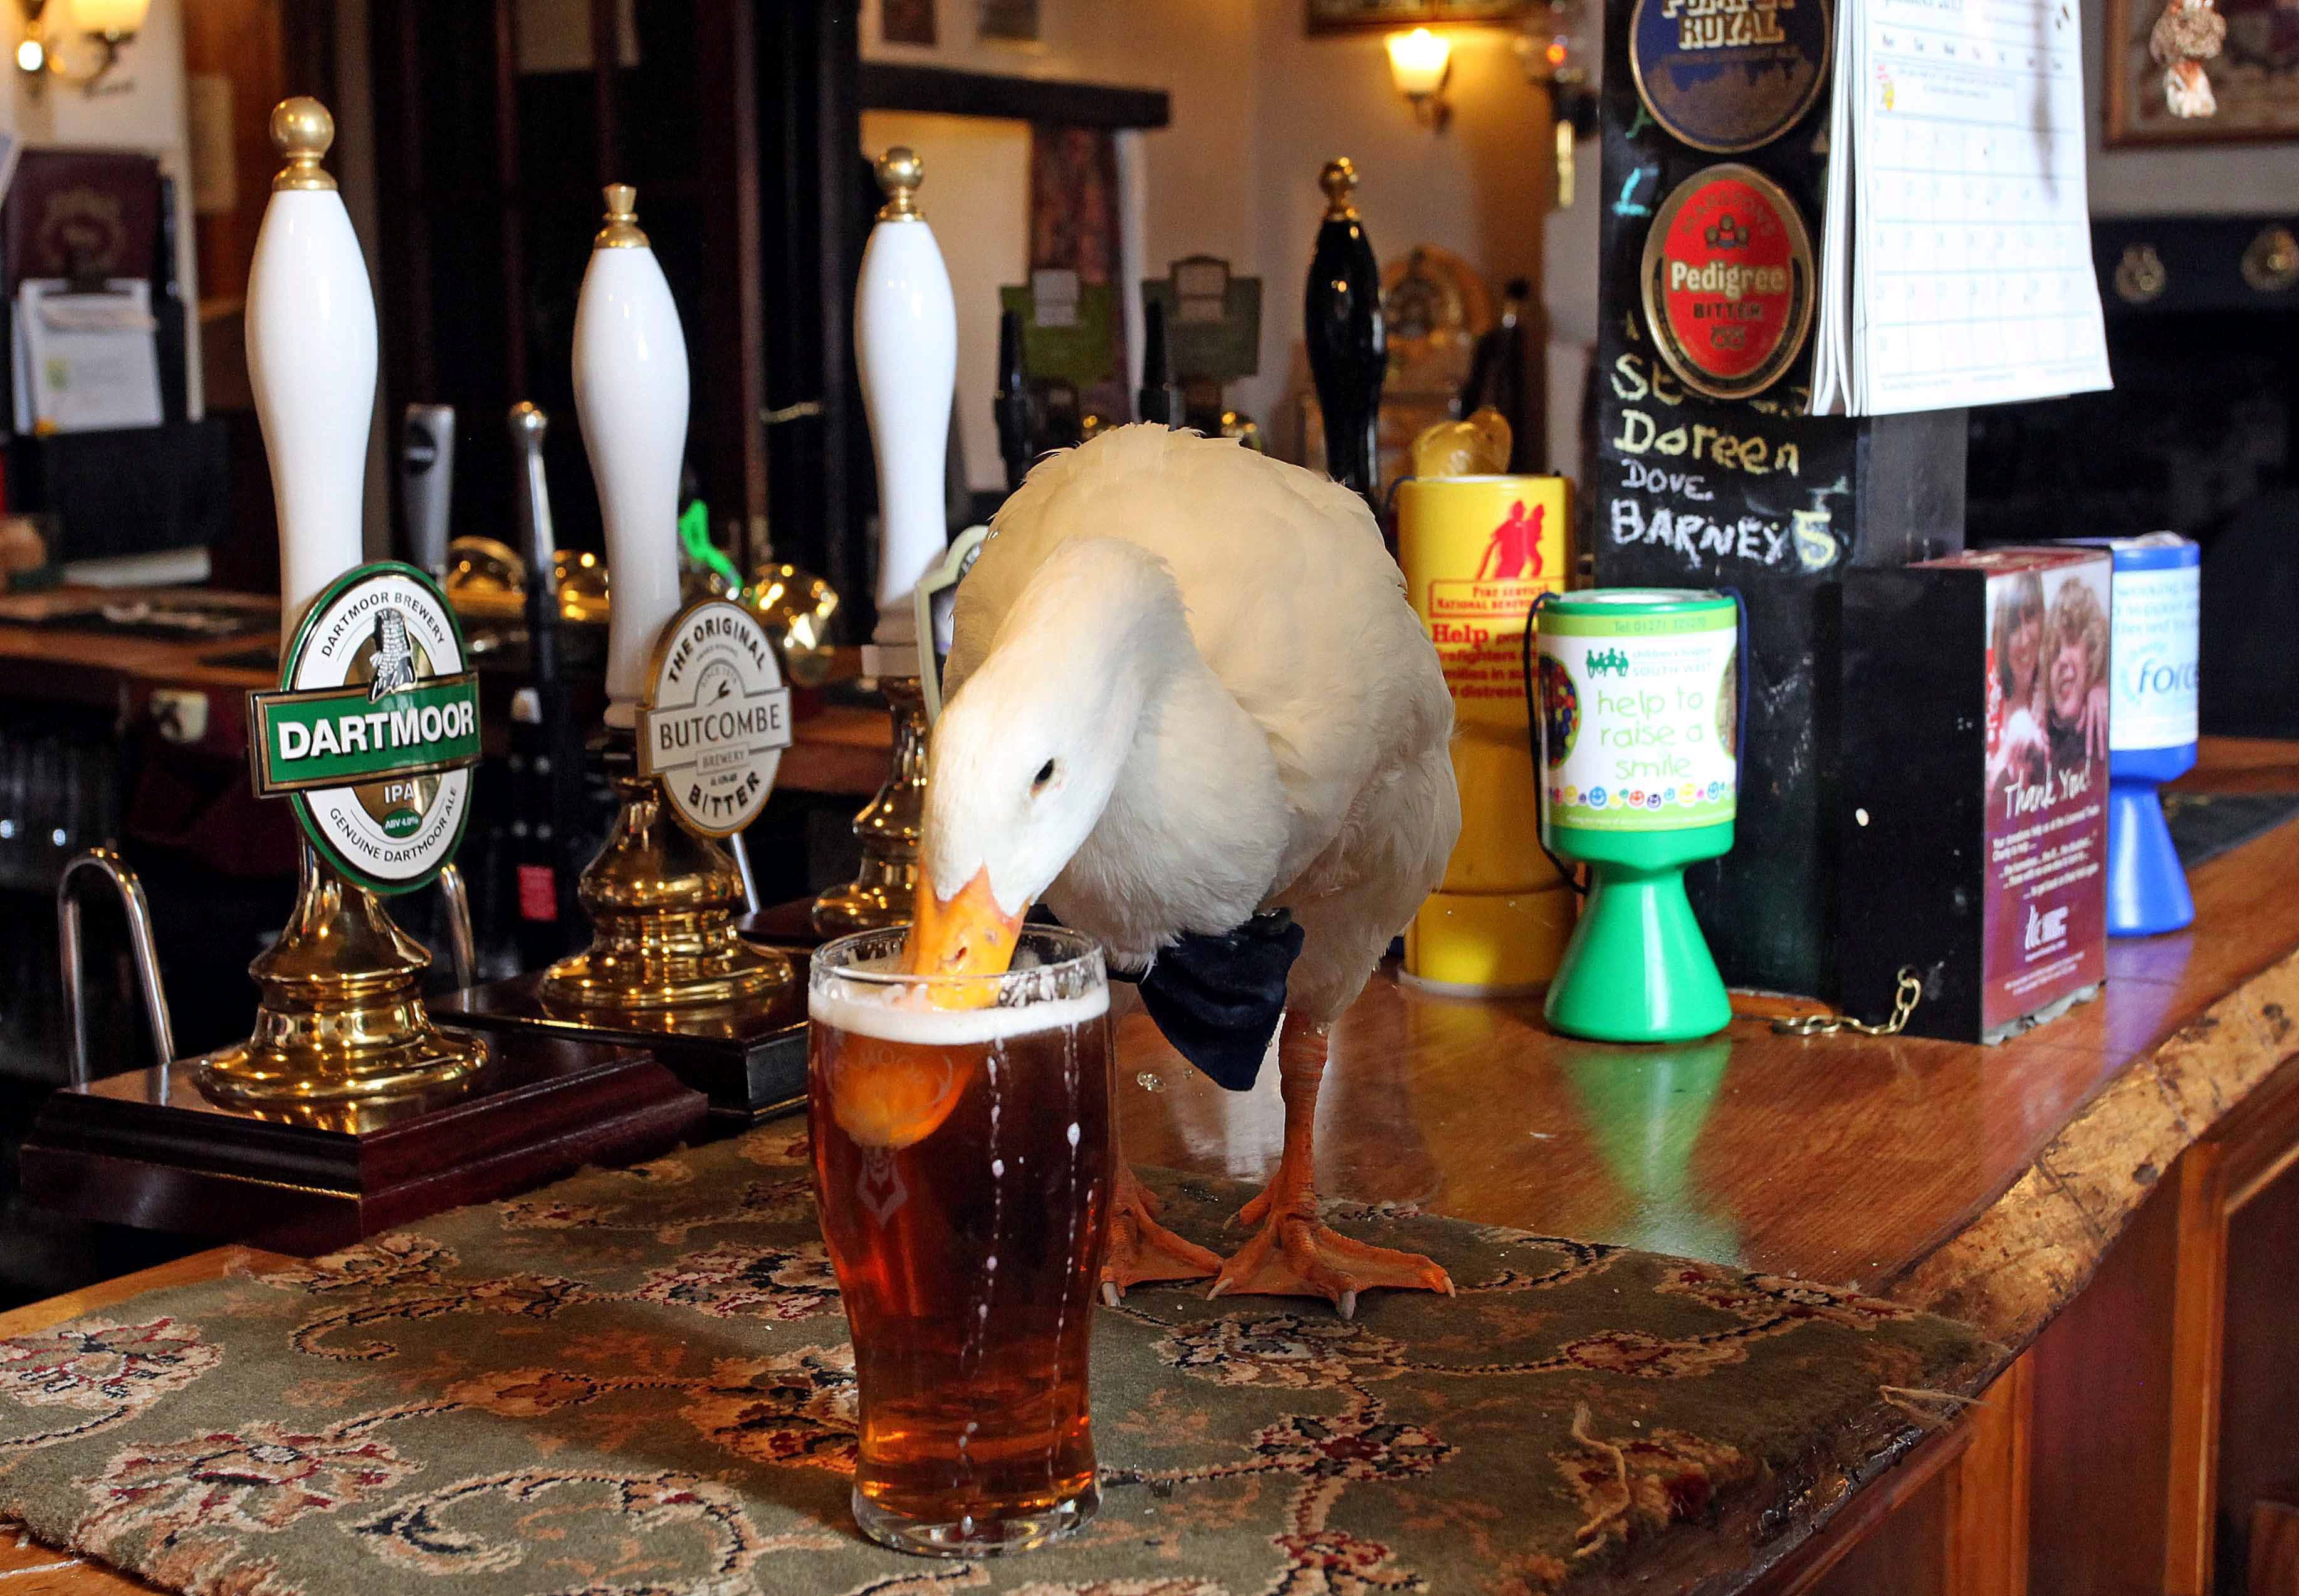 In 2015, Star the duck from Devon became a celebrity for his bow tie and love of ale